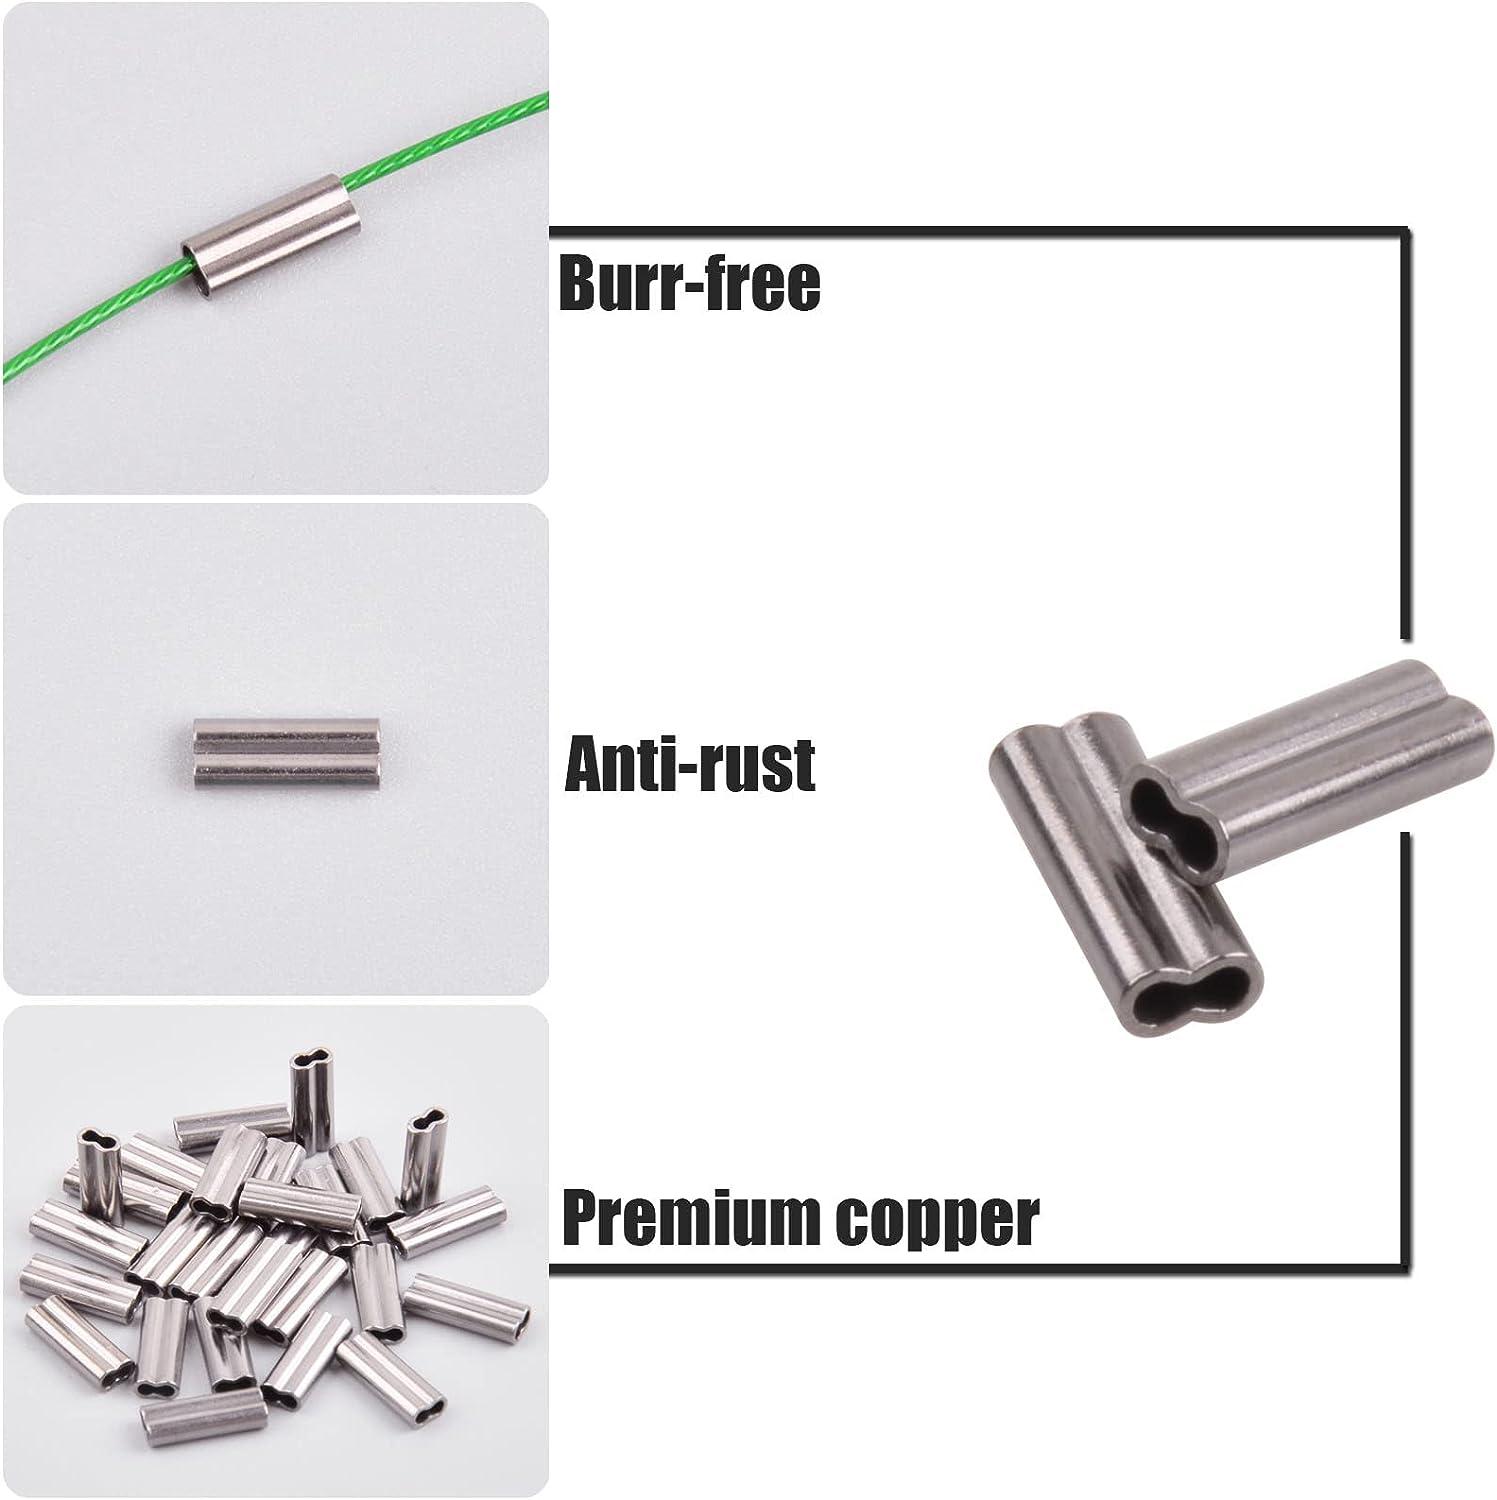 500pcs Fishing Crimp Sleeves Kit, Double Barrel Crimp Sleeves Brass Copper  Crimping Sleeve Tubes Fishing Line Connector Fishing Wire Leader Rigging  Tackle